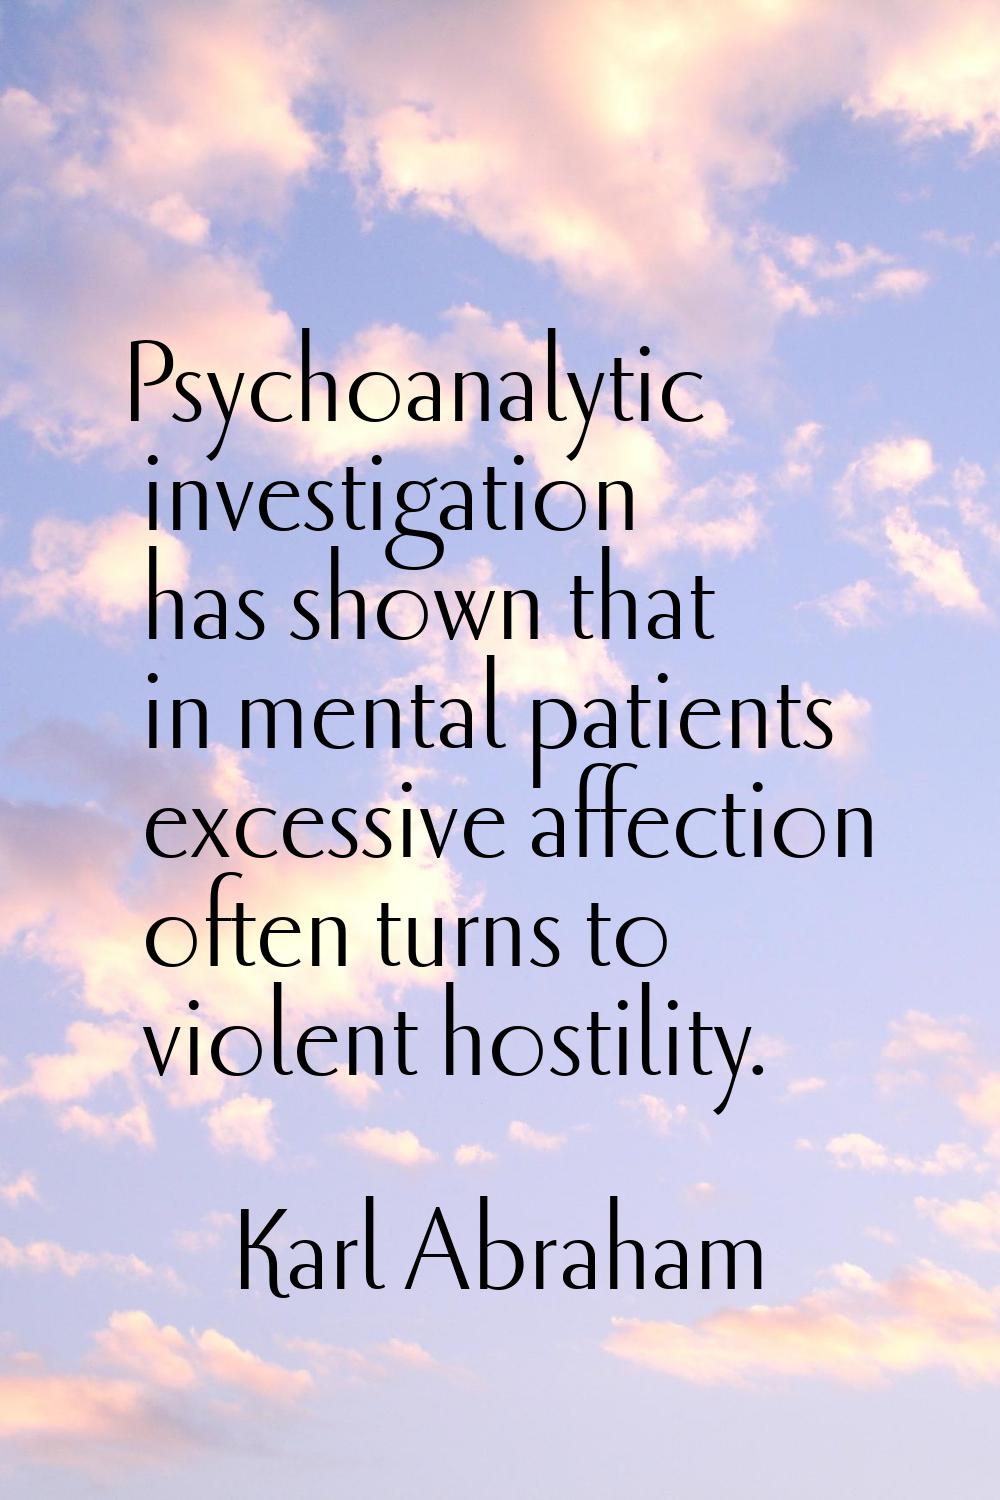 Psychoanalytic investigation has shown that in mental patients excessive affection often turns to v